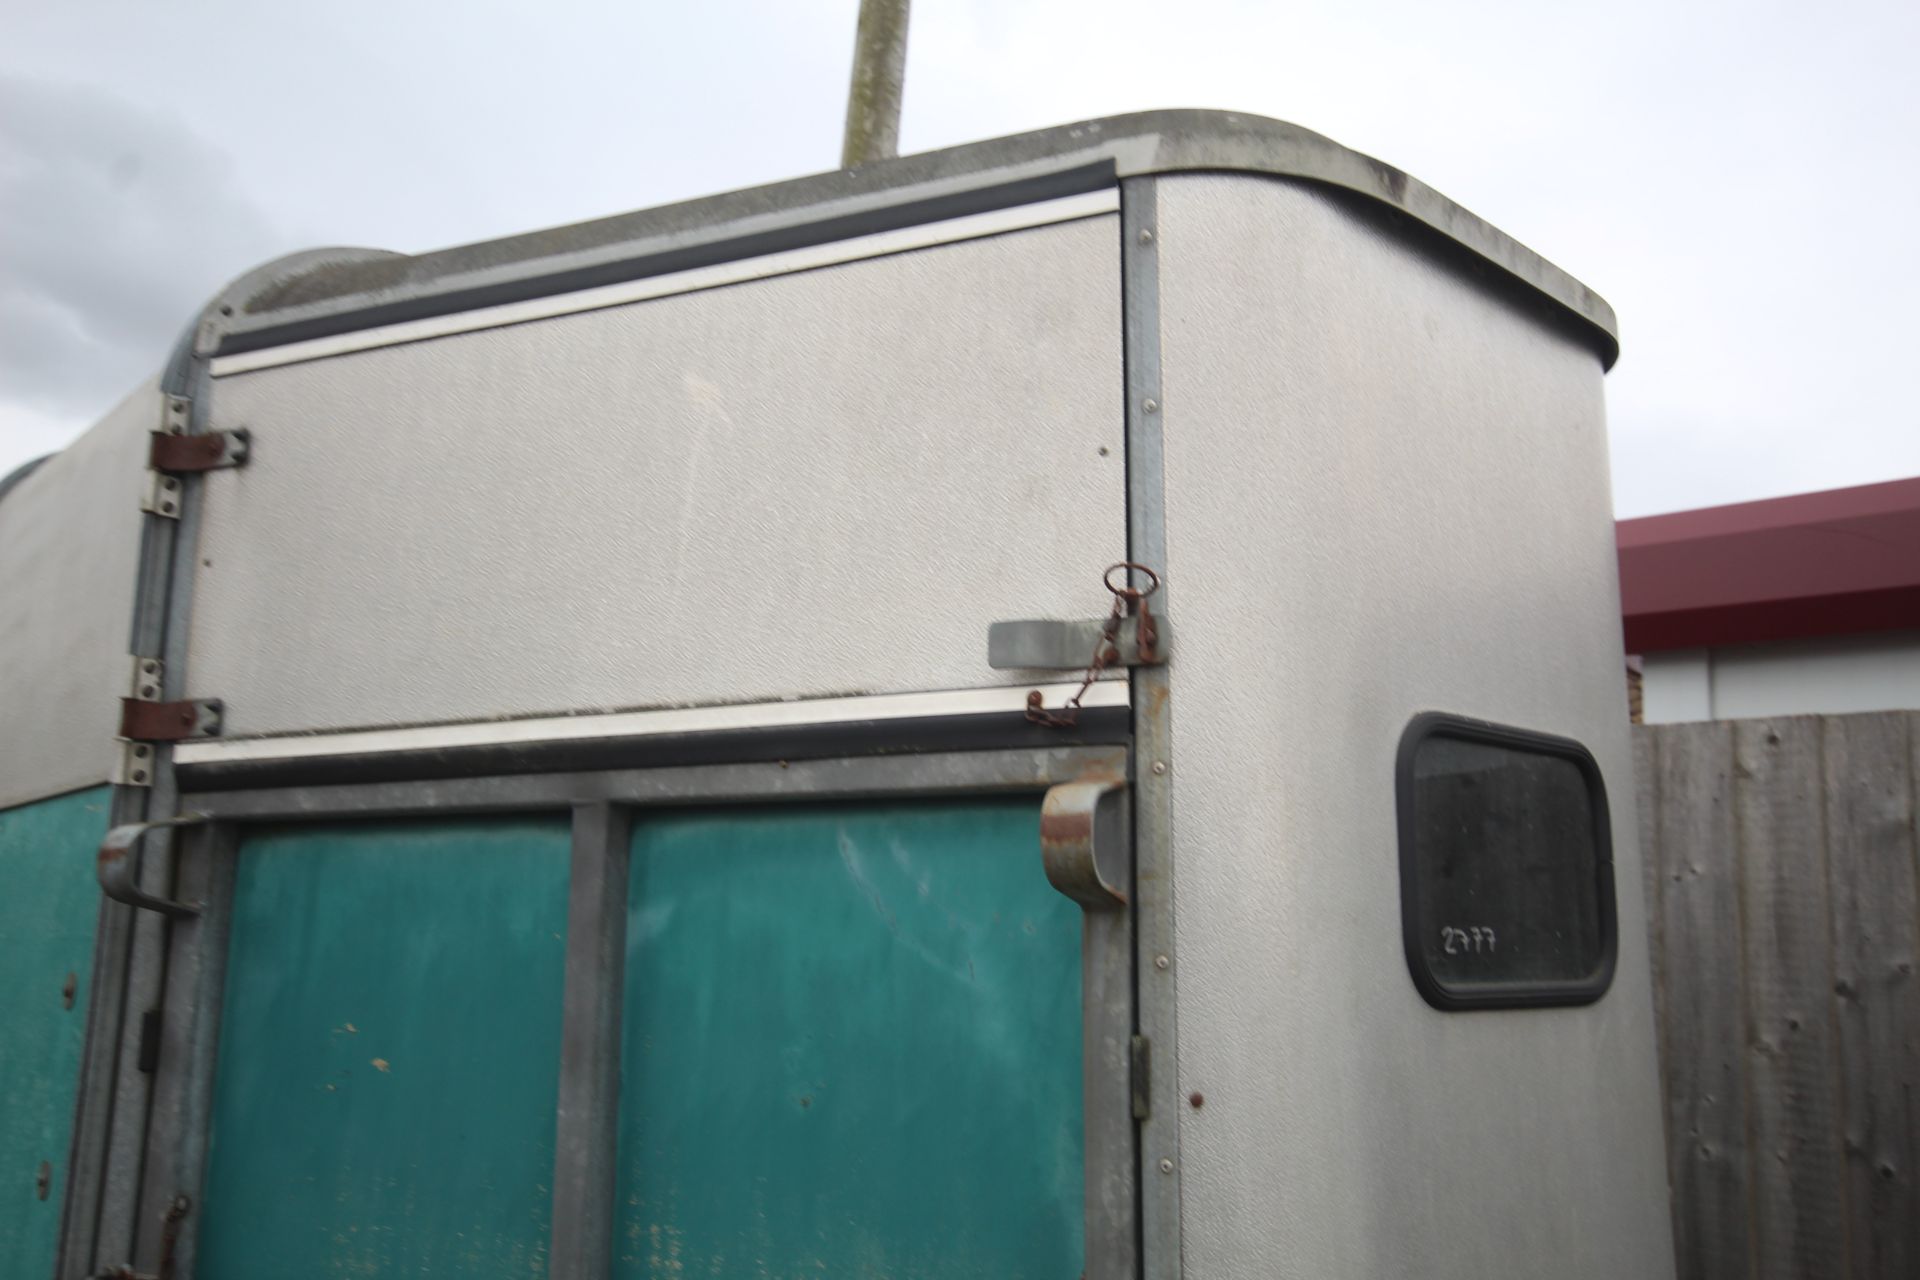 Ifor Williams 505 two horse twin axle horsebox. Recent new floor fitted by main dealer. - Image 2 of 44